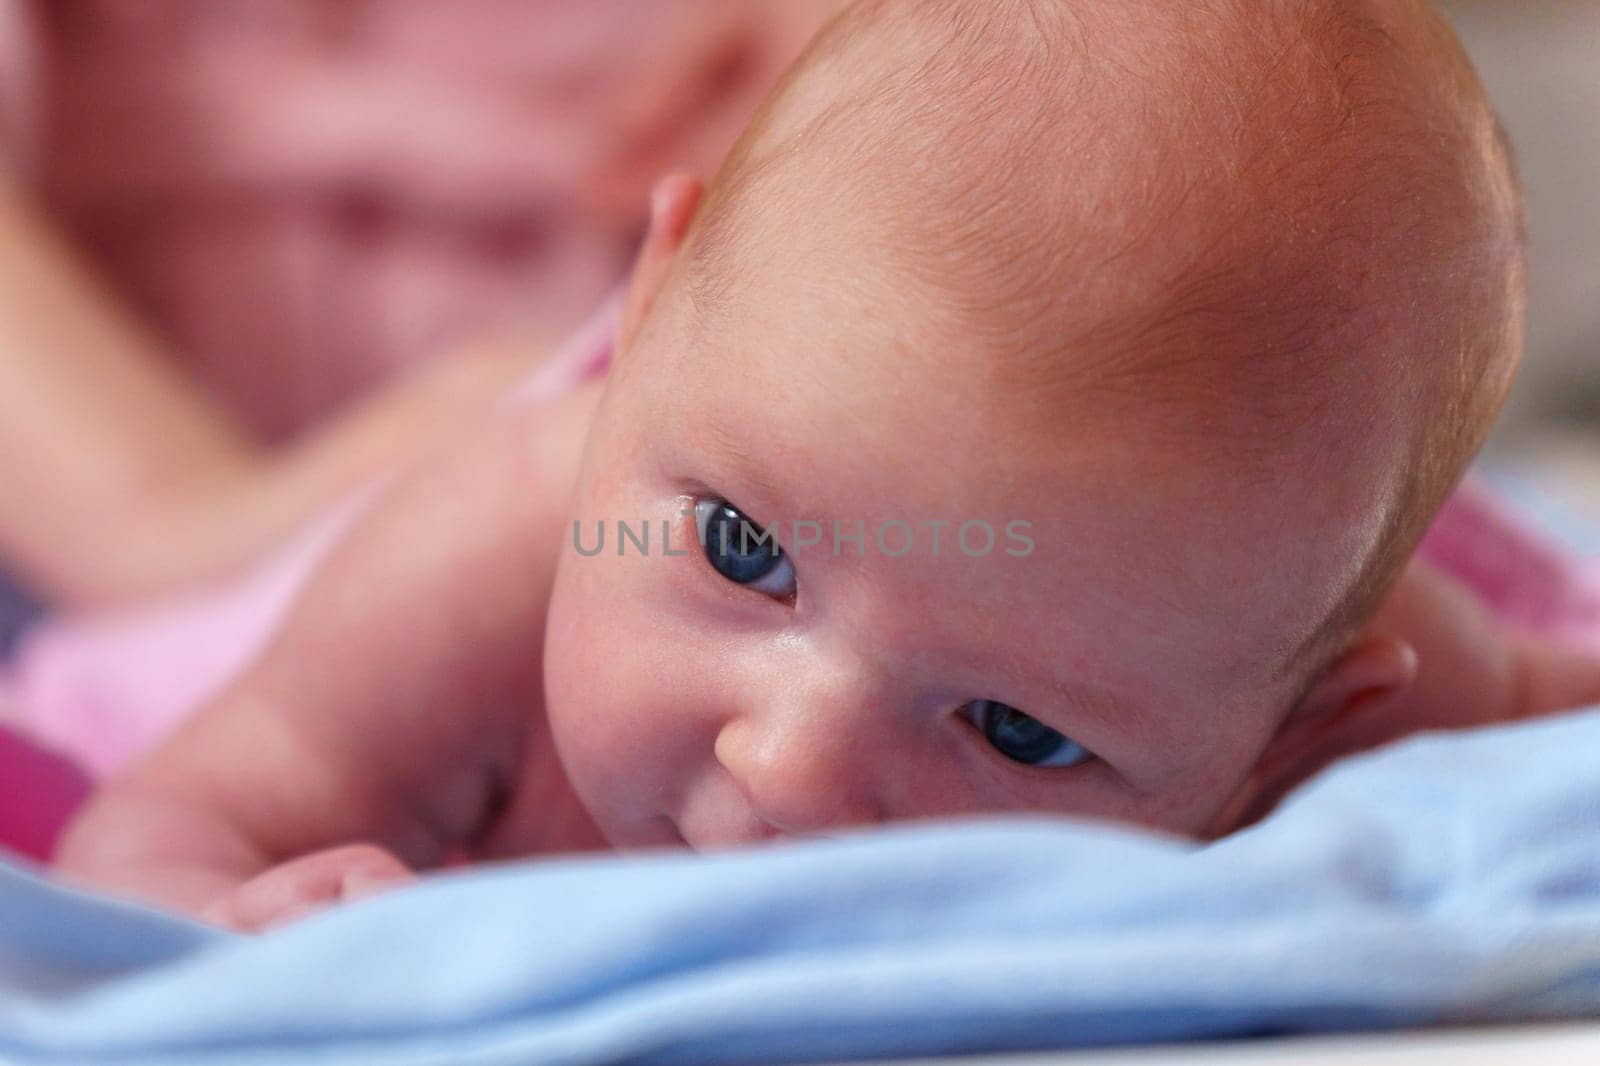 Newborn baby, at the tender age of two months, lies comfortably while curiously looking at the world around with bright, expressive eyes.